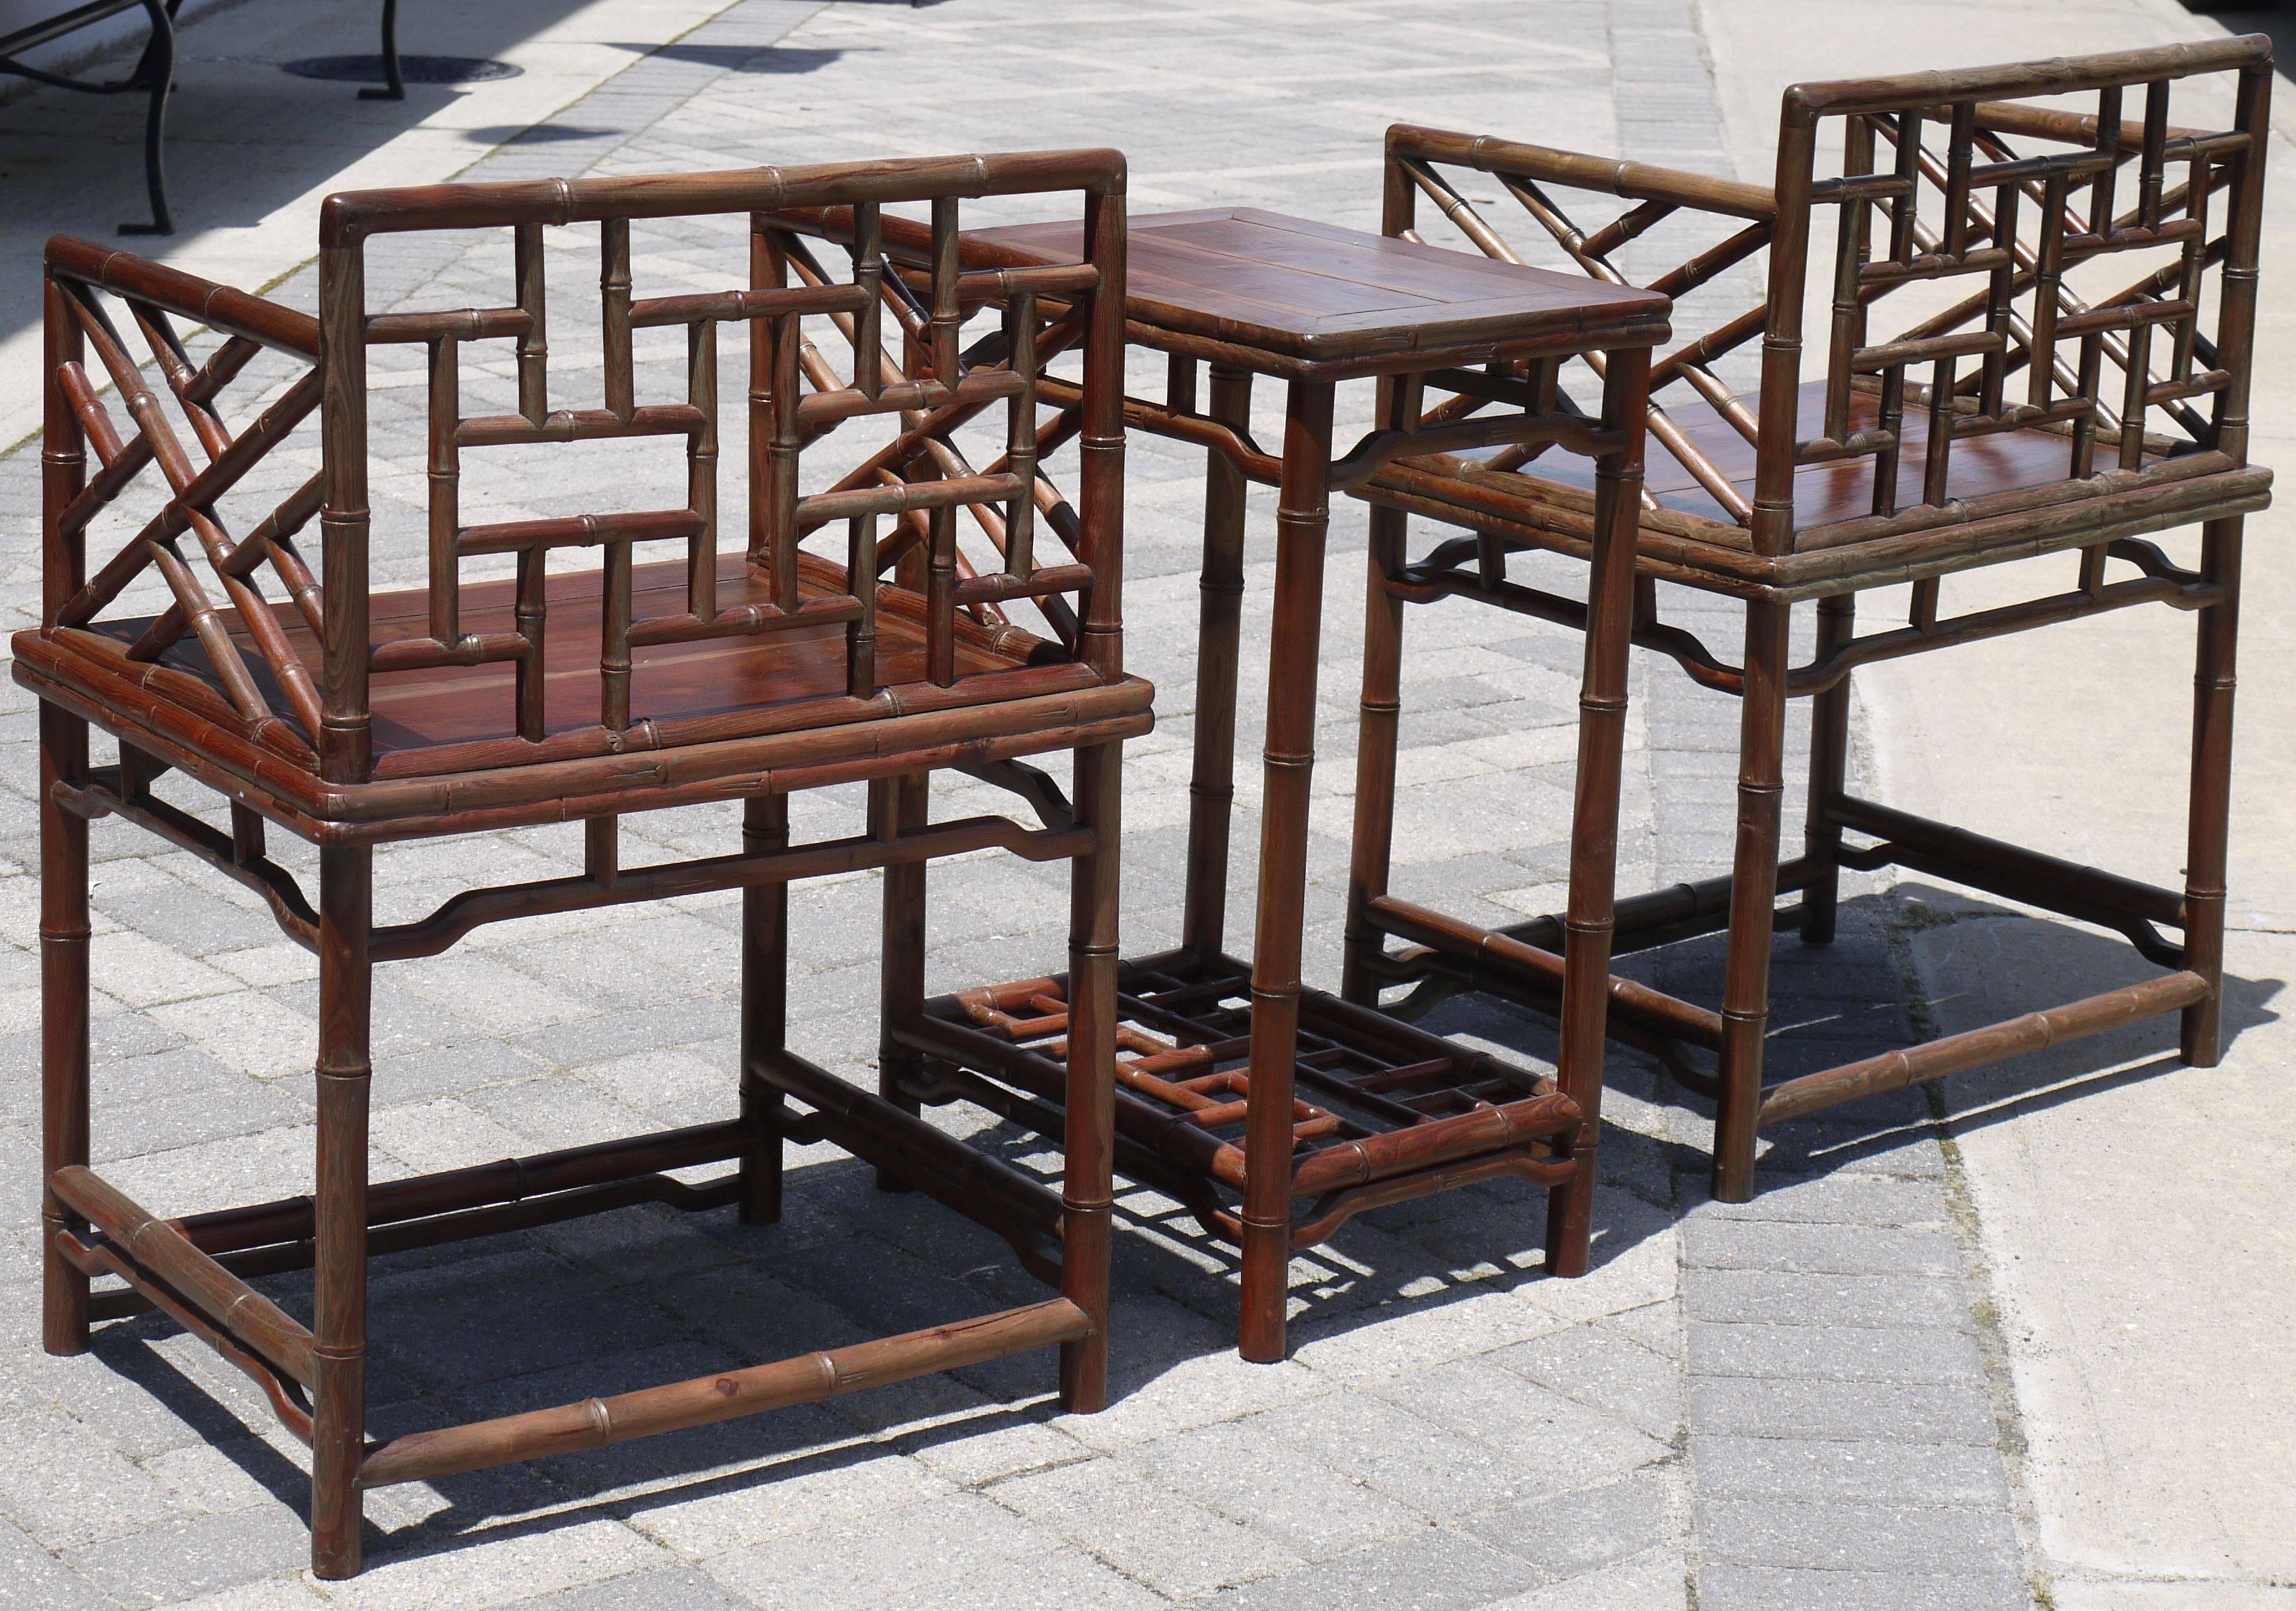 Chinese Chippendale Pair of Chinese Faux Bamboo Chairs and Table Made from Rare Zhazhen Wood